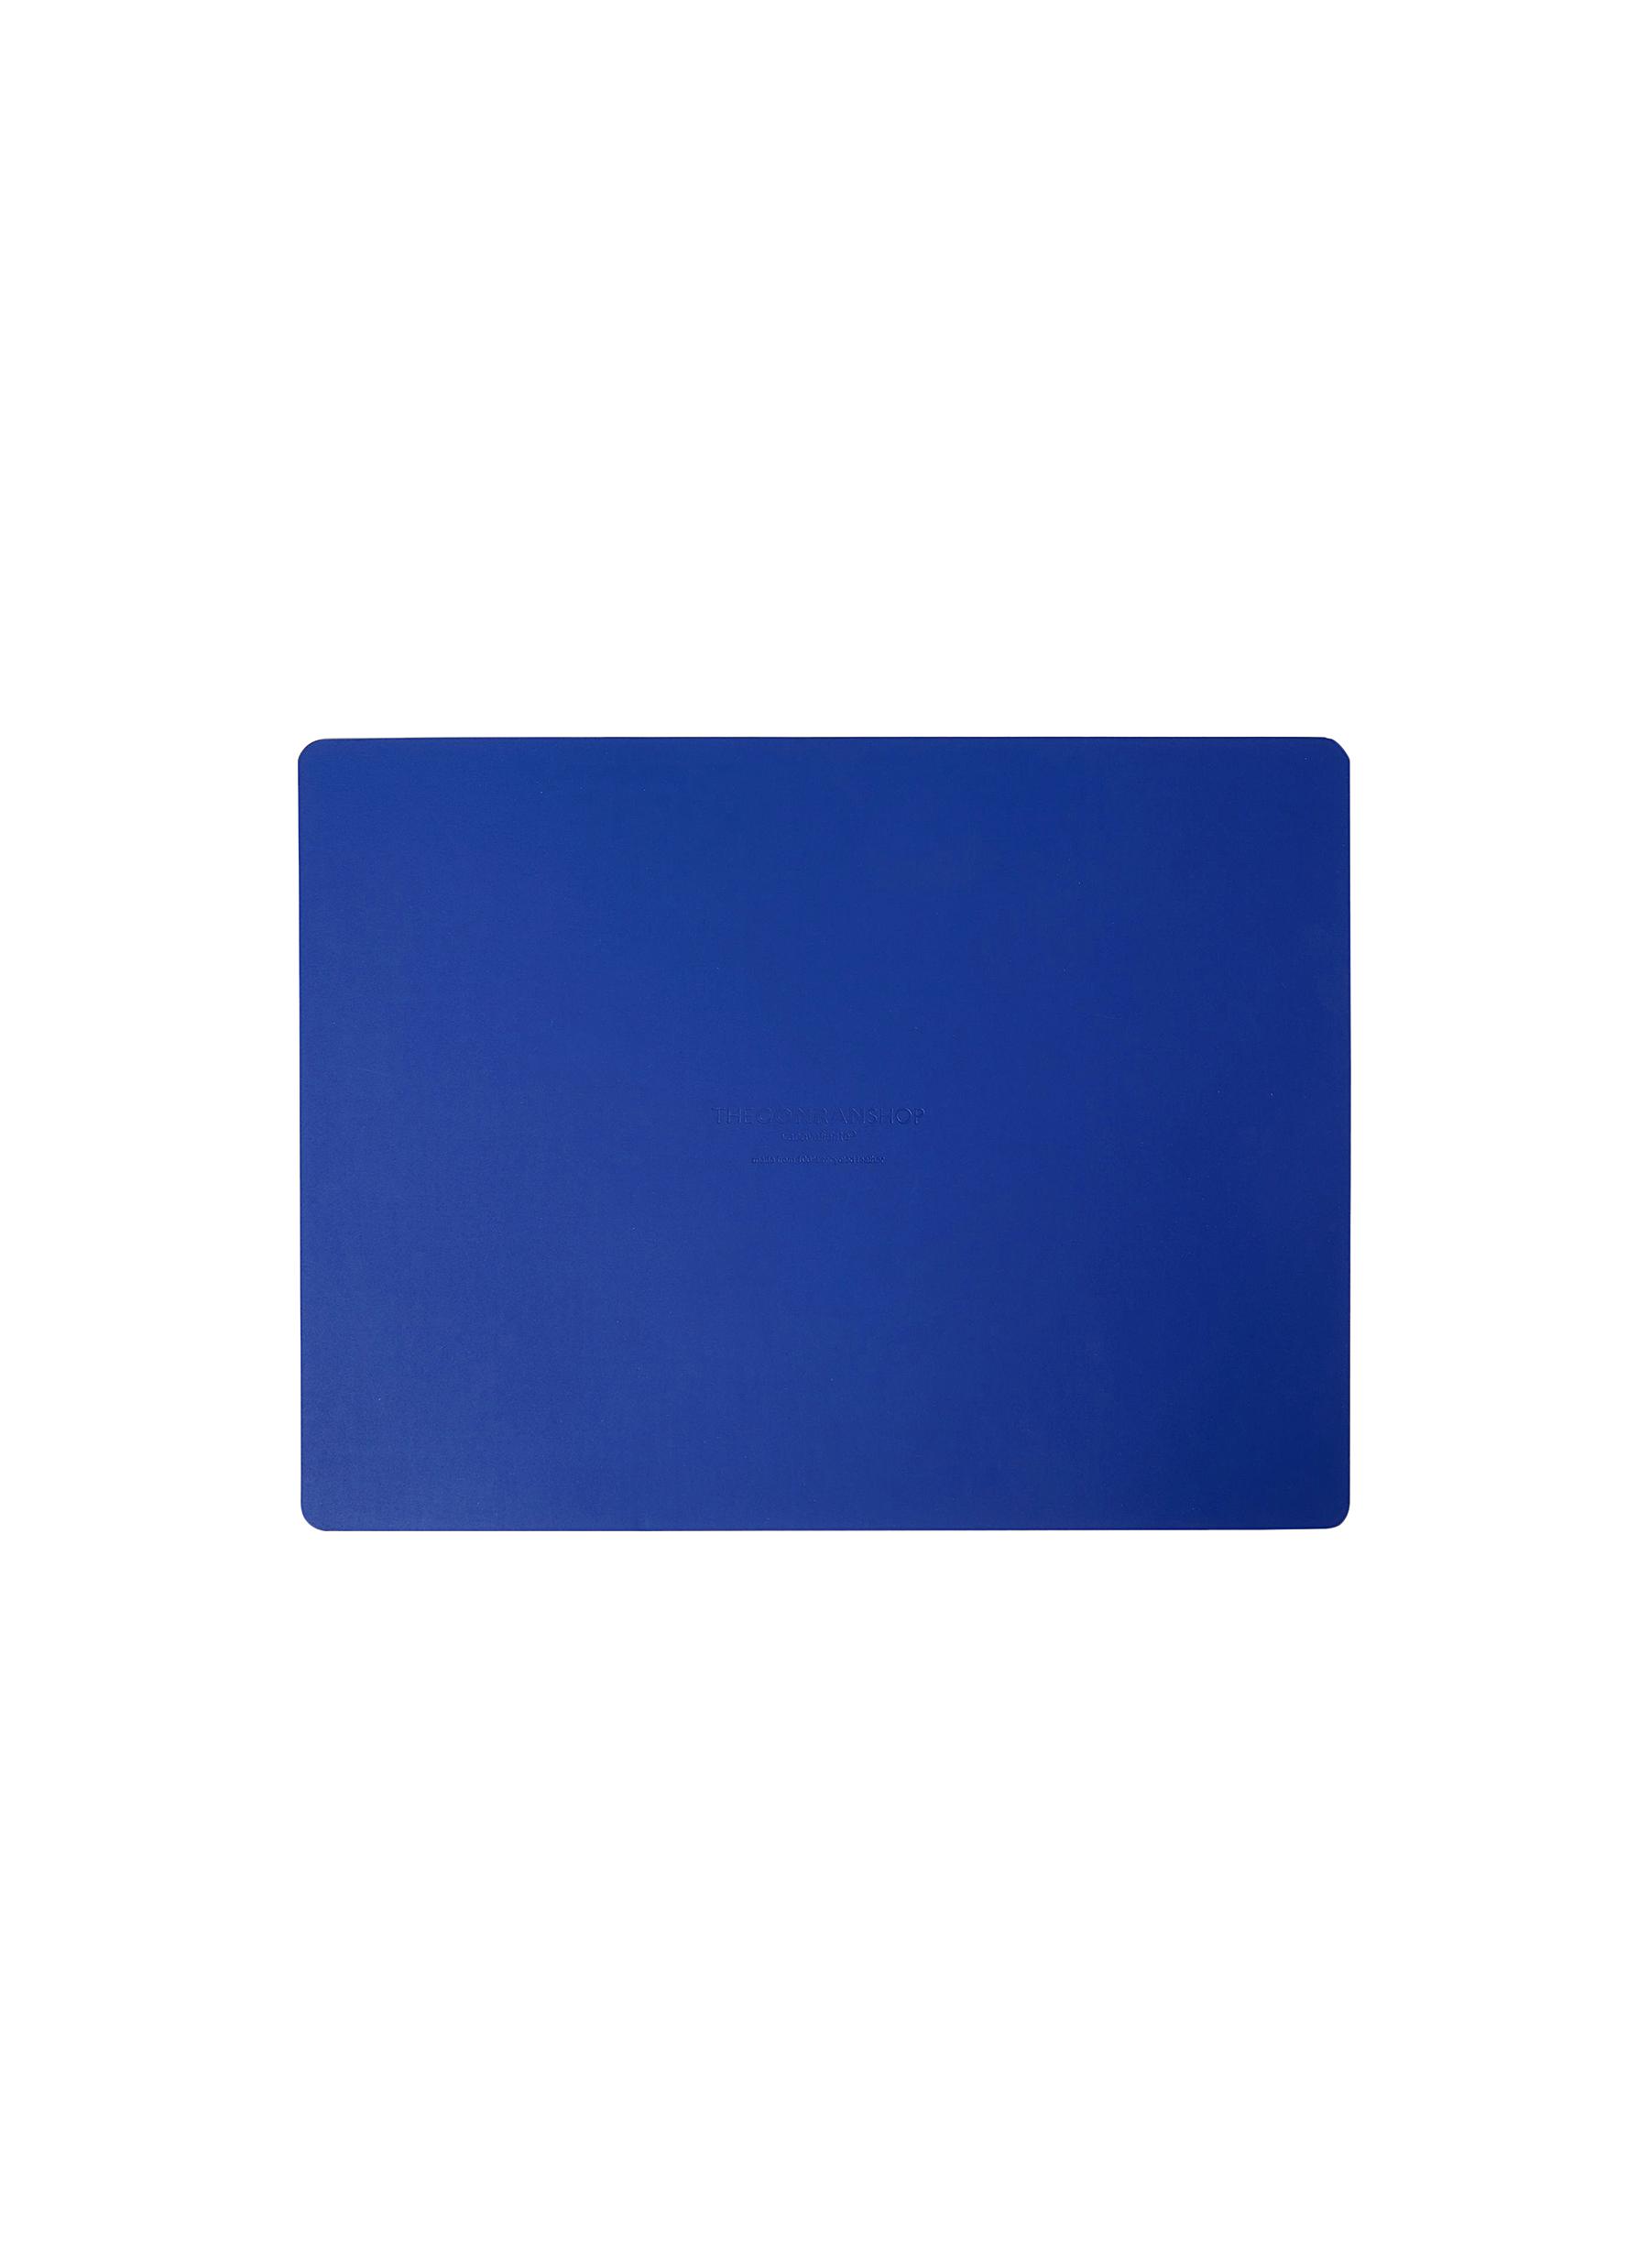 Cuero Recycled Leather Rectangular Placemat - Conran Blue